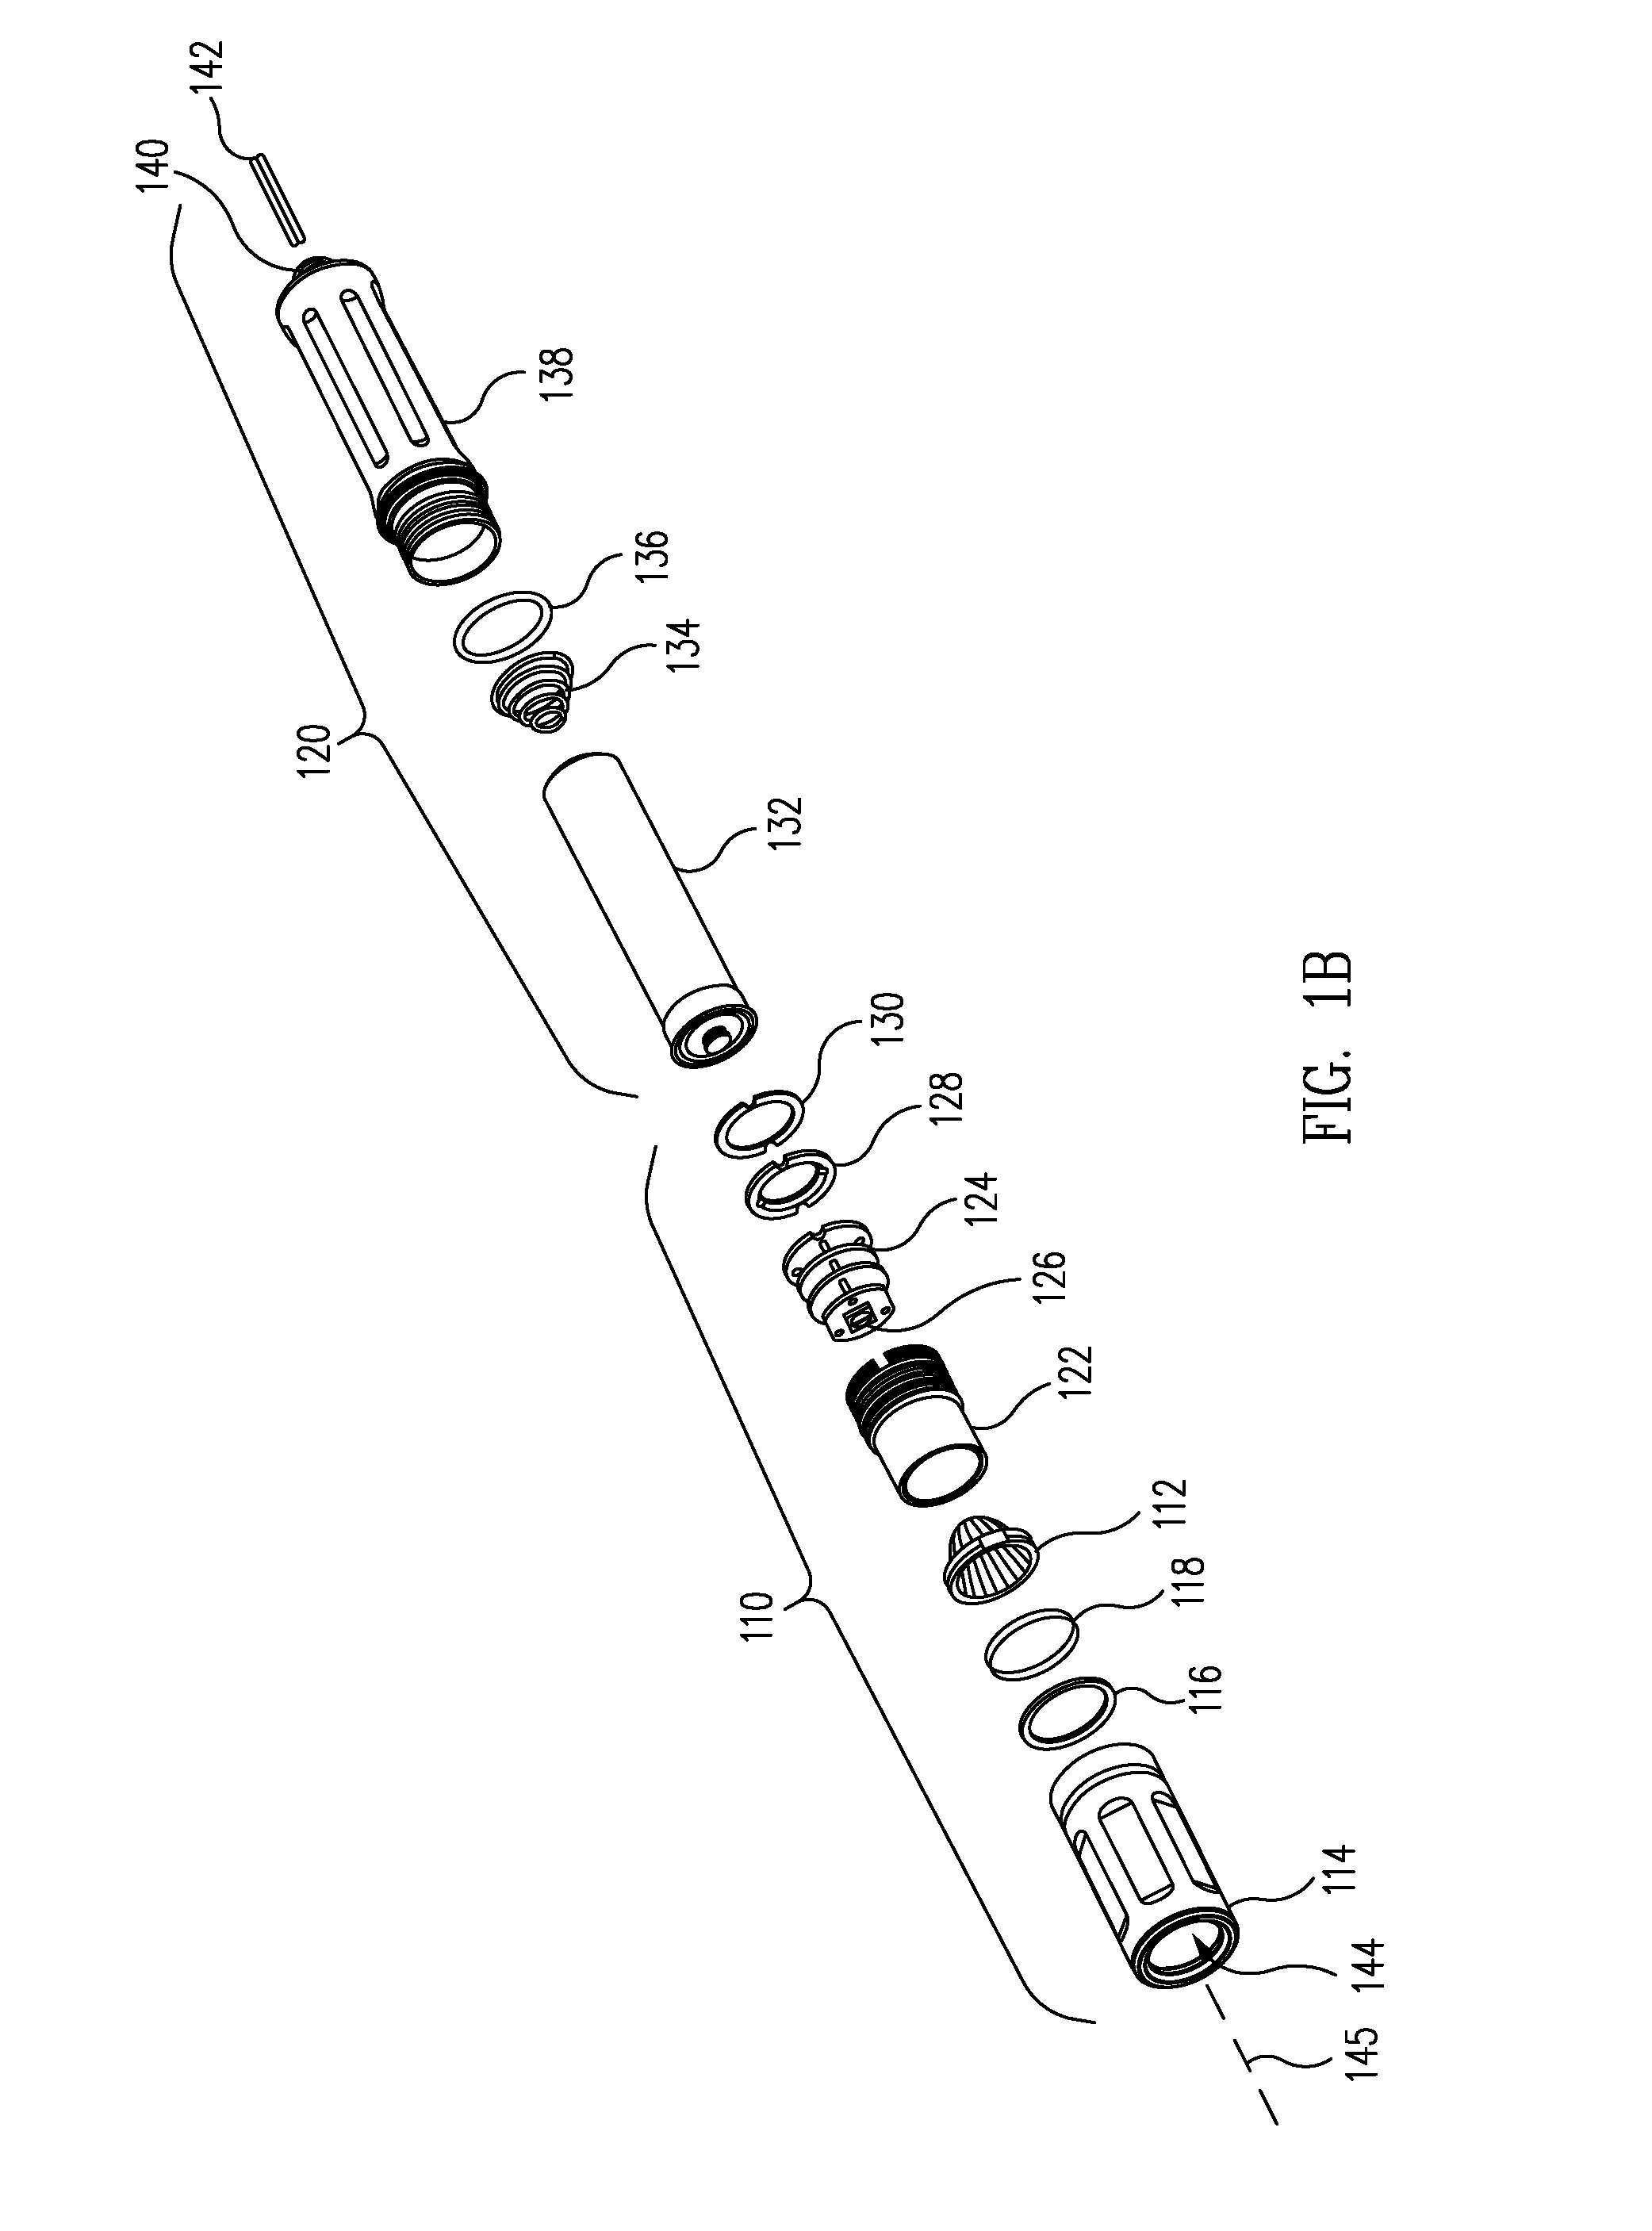 Lighting device attachment for mobile devices